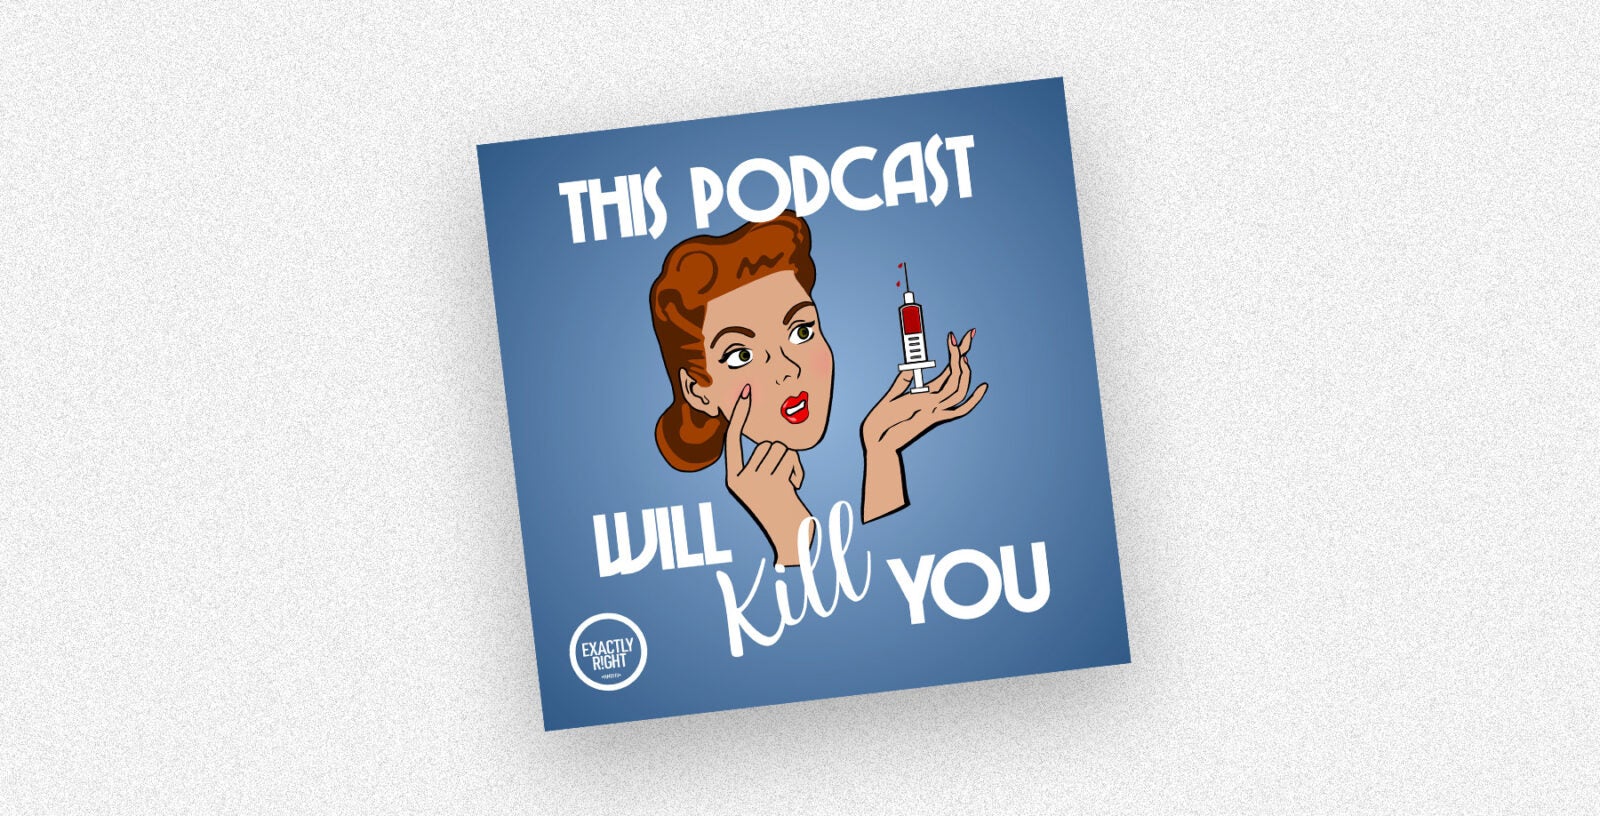 The podcast tile for "This Podcast Will Kill You" rests on a white-speckled background.